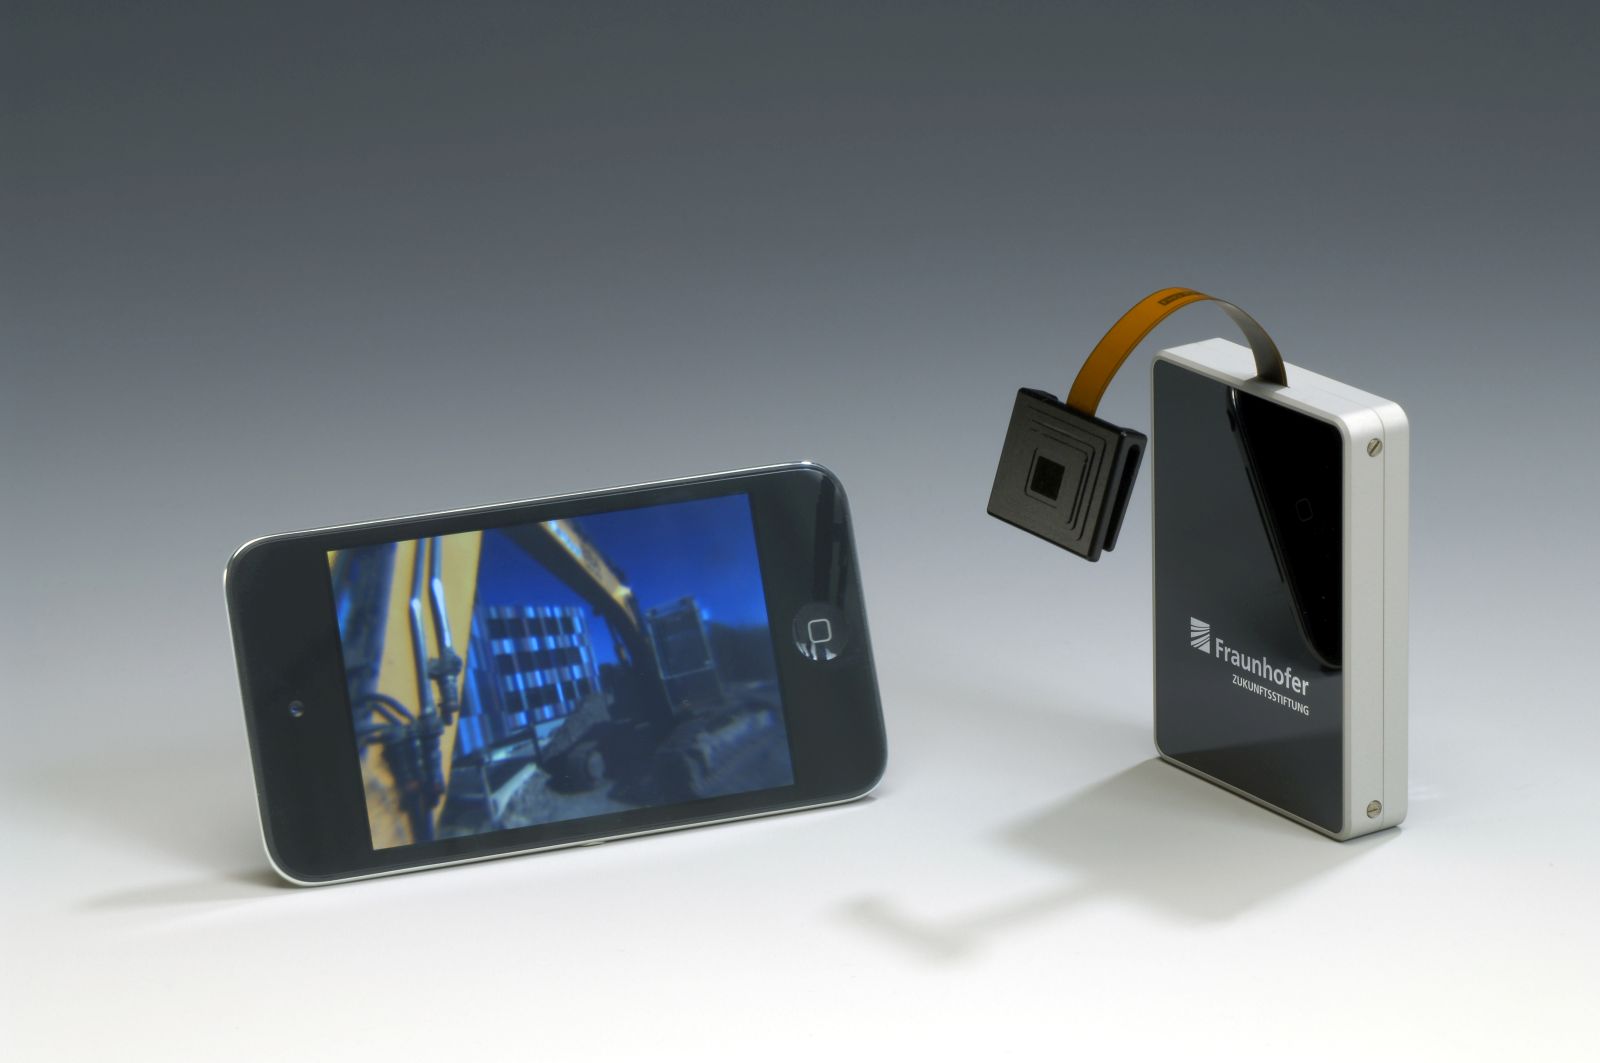 The first prototype of the technology transfers the images from the camera to the smartphone by Bluetooth via a transmission box.